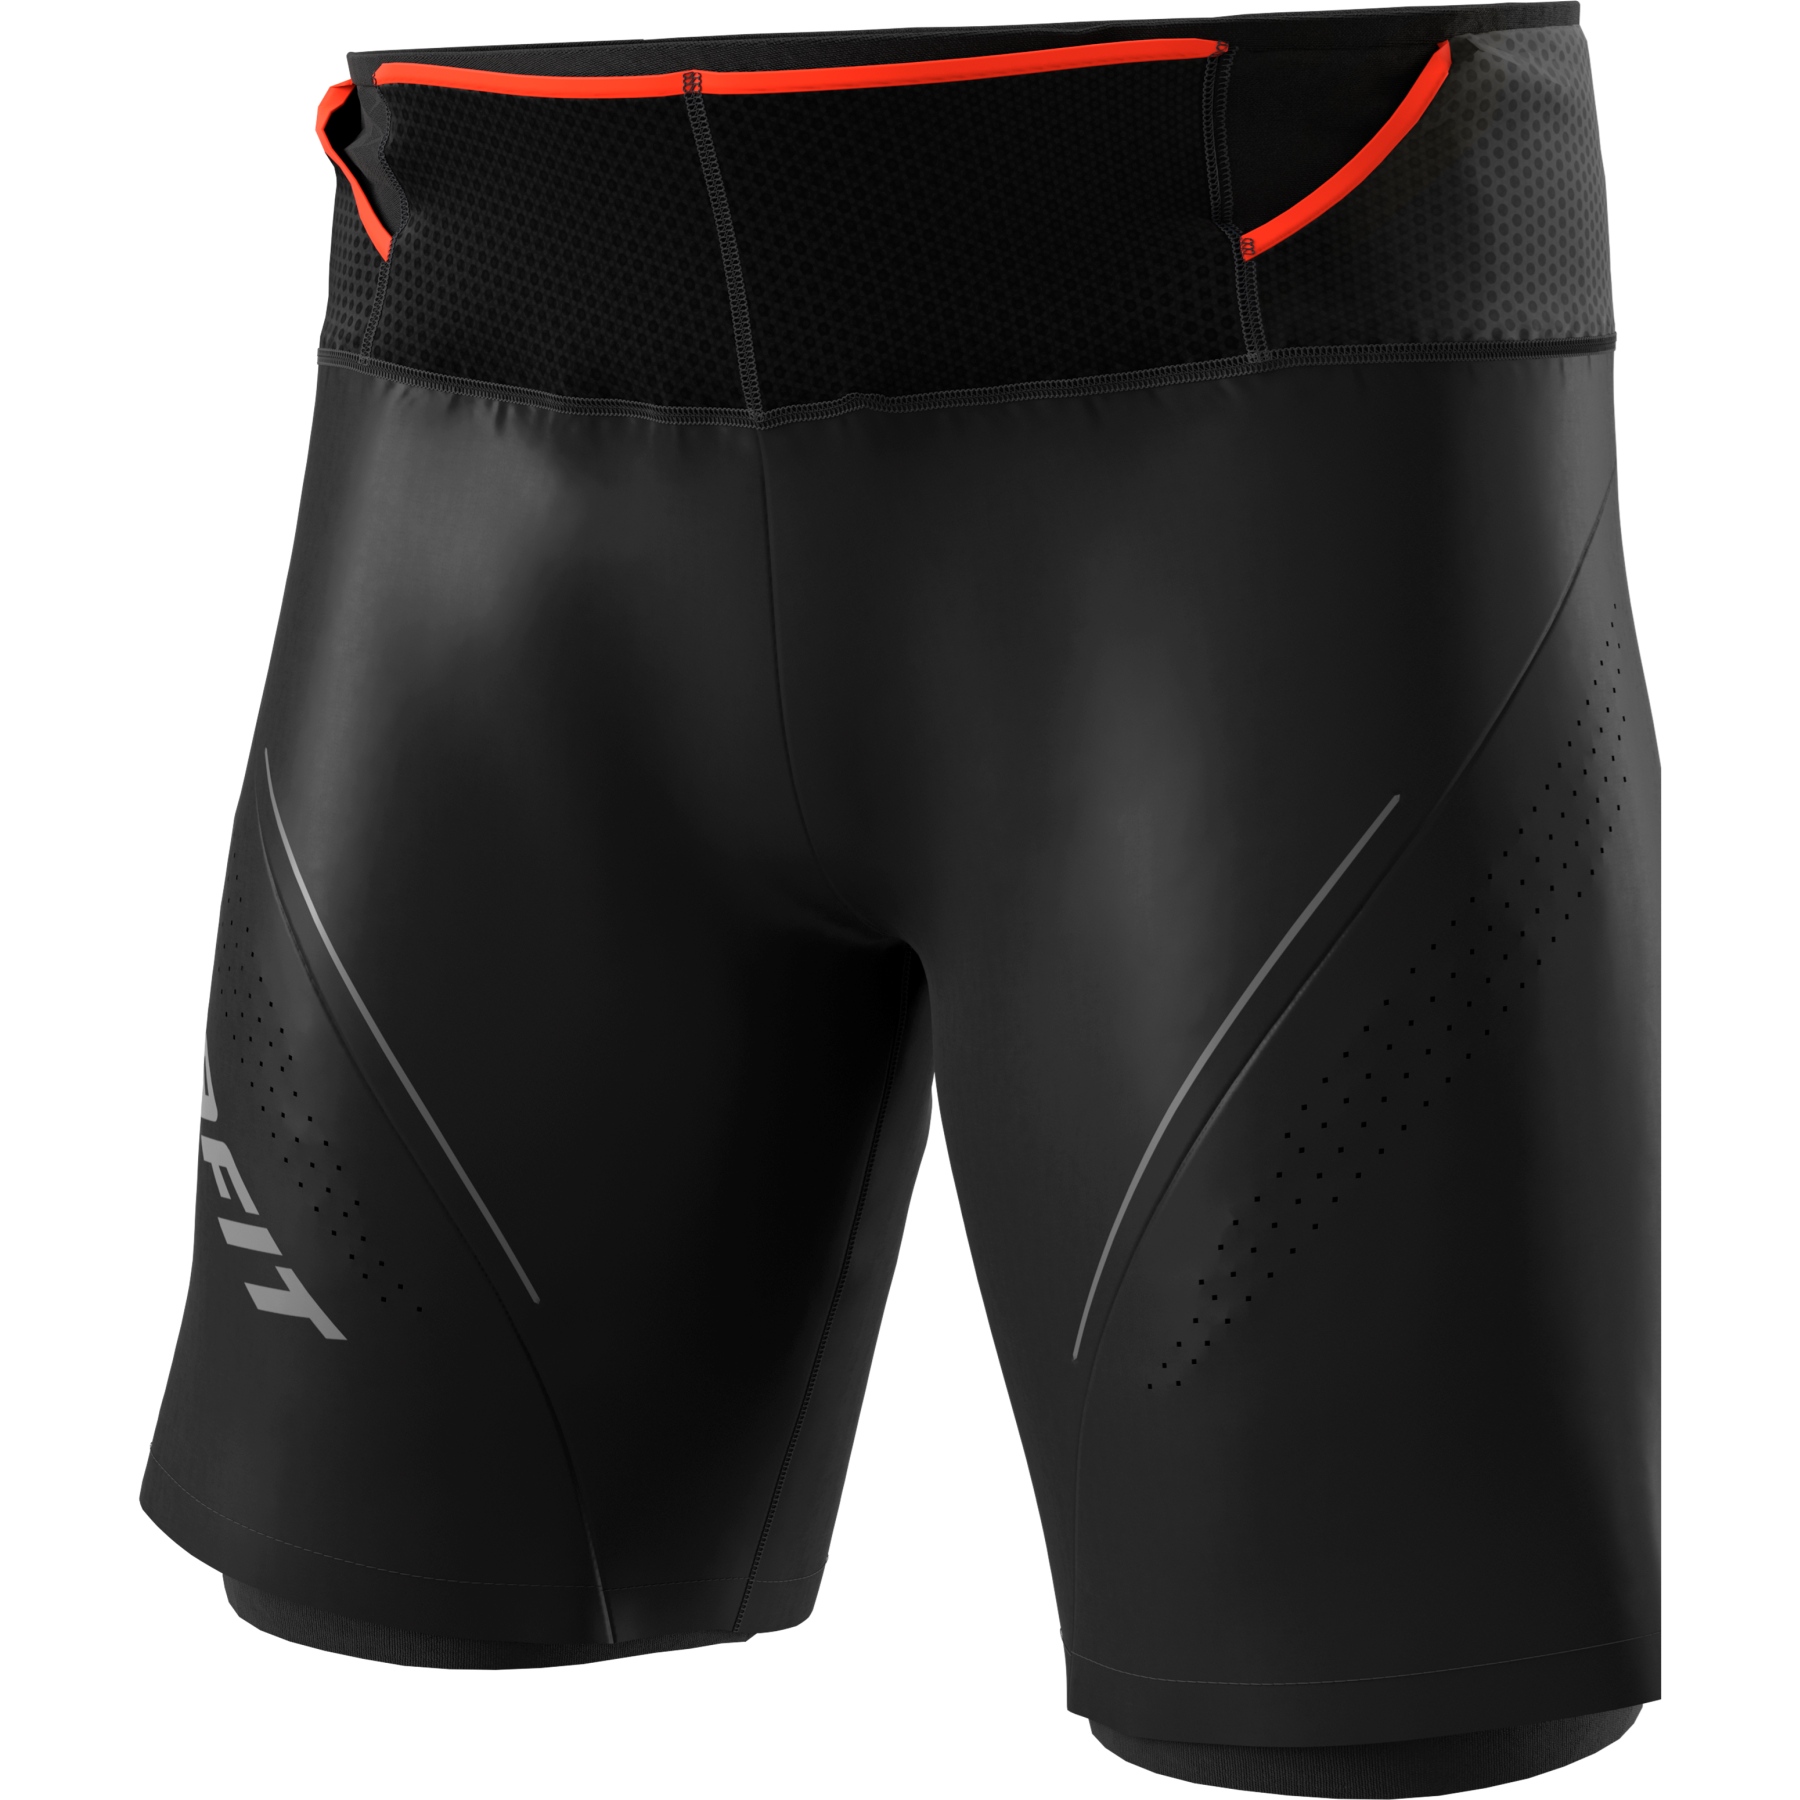 Productfoto van Dynafit Ultra 2in1 Shorts Heren - Black Out